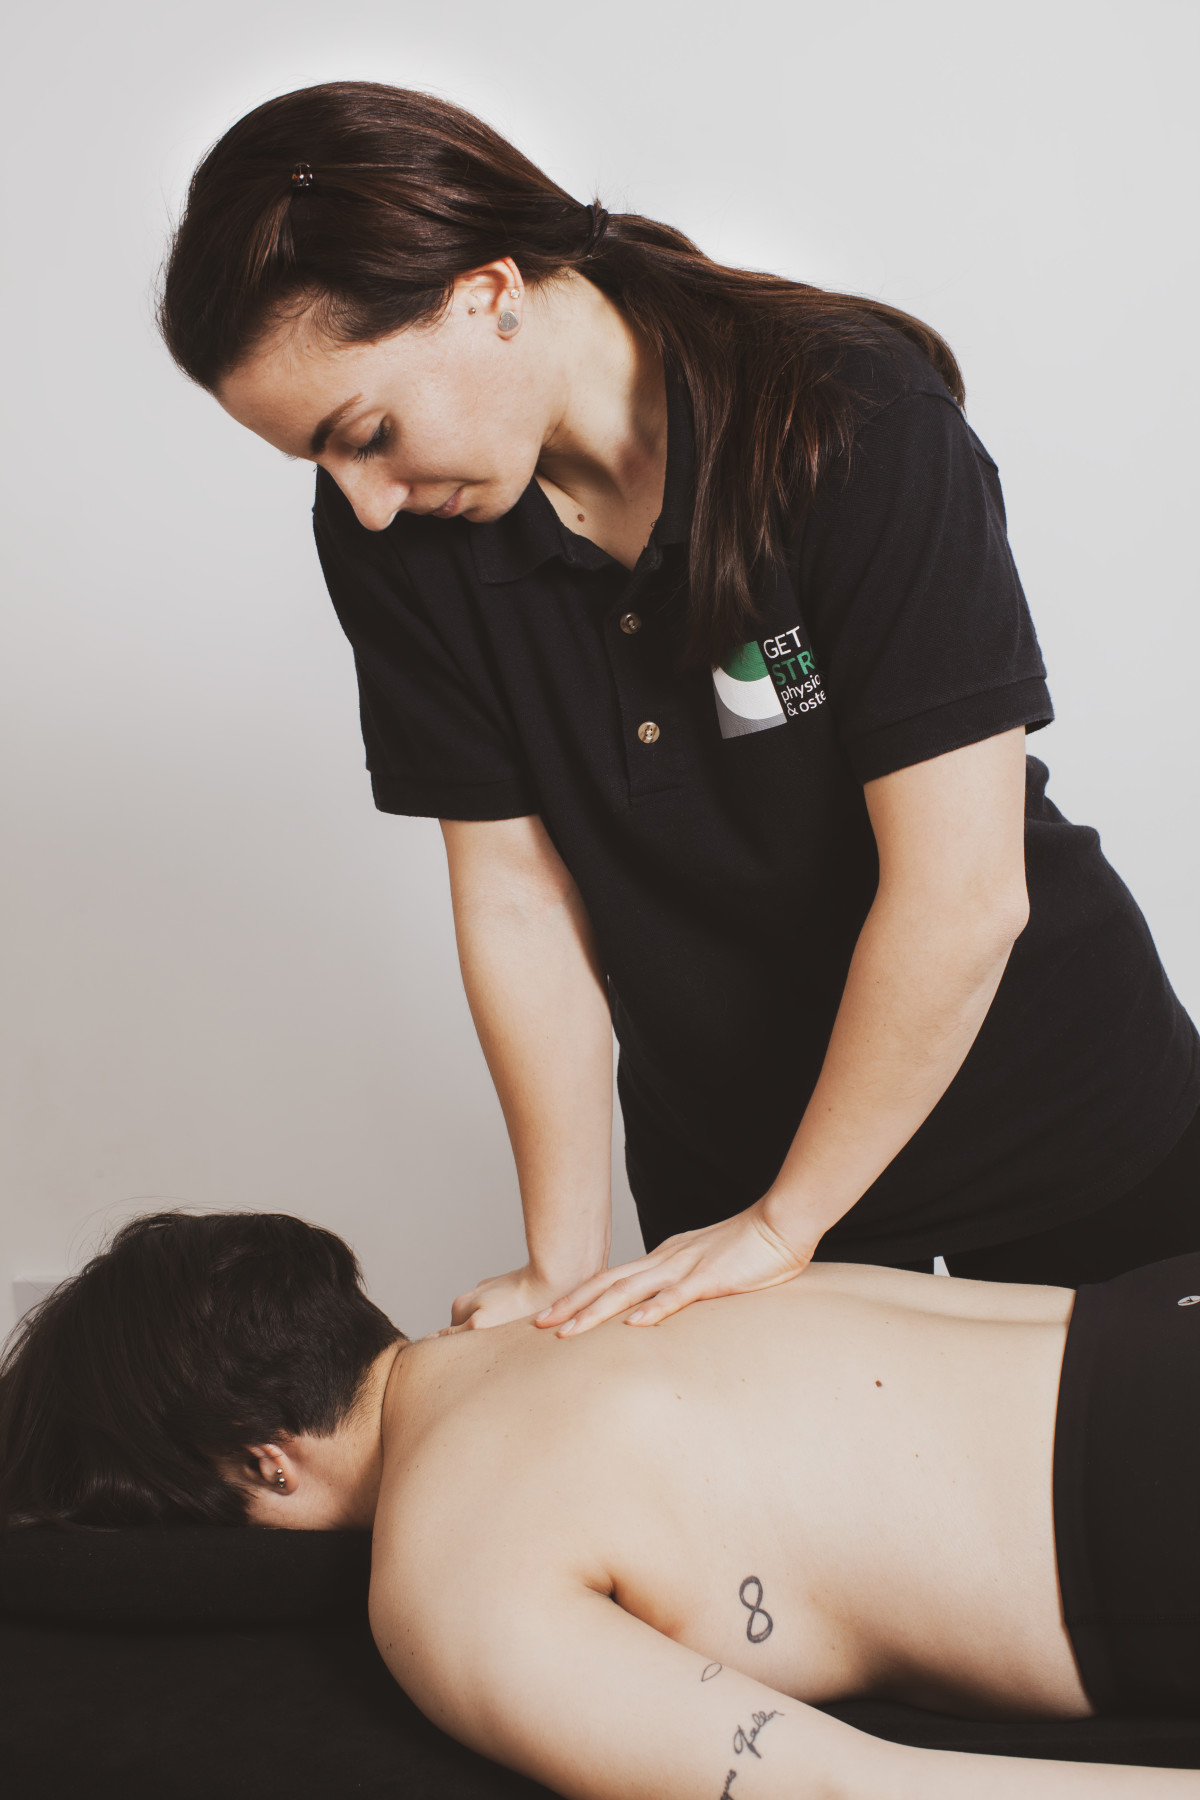 Osteopathy in Kew, your local osteopaths will help reduce pain and get you moving better. Your movement is your strength. 